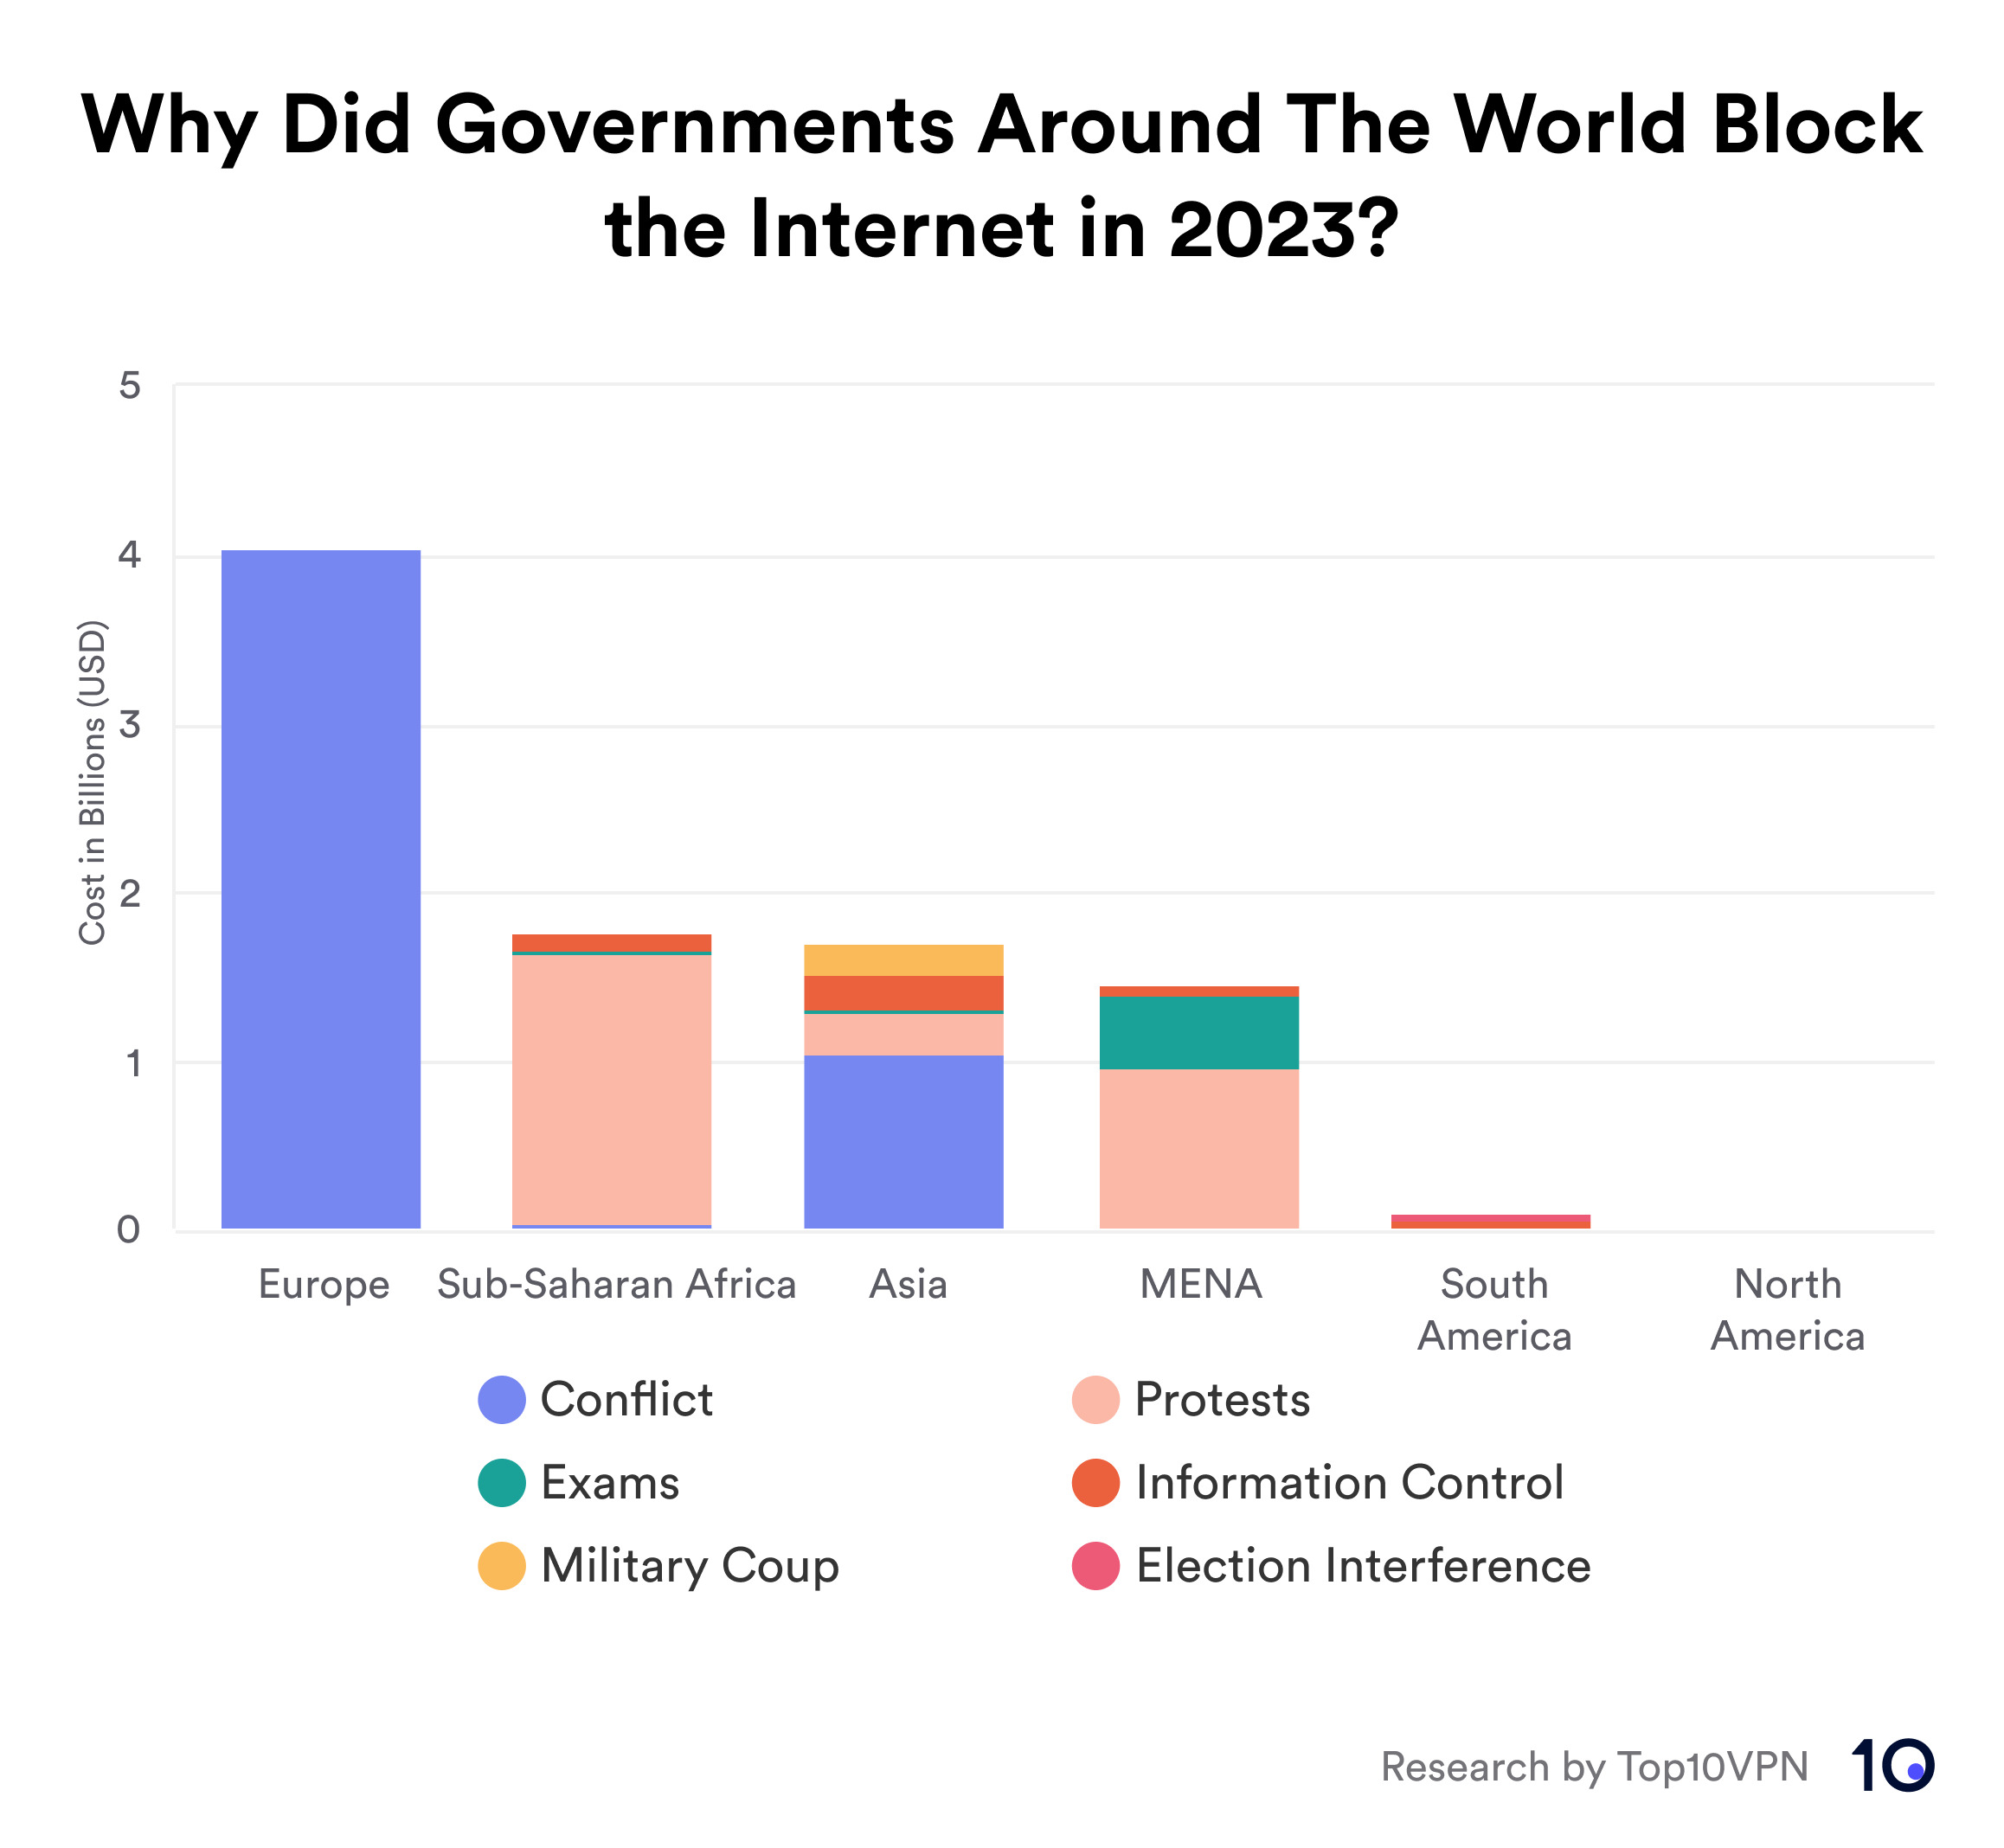 Bar chart showing the most expensive reasons for internet shutdowns in 2023 across different regions